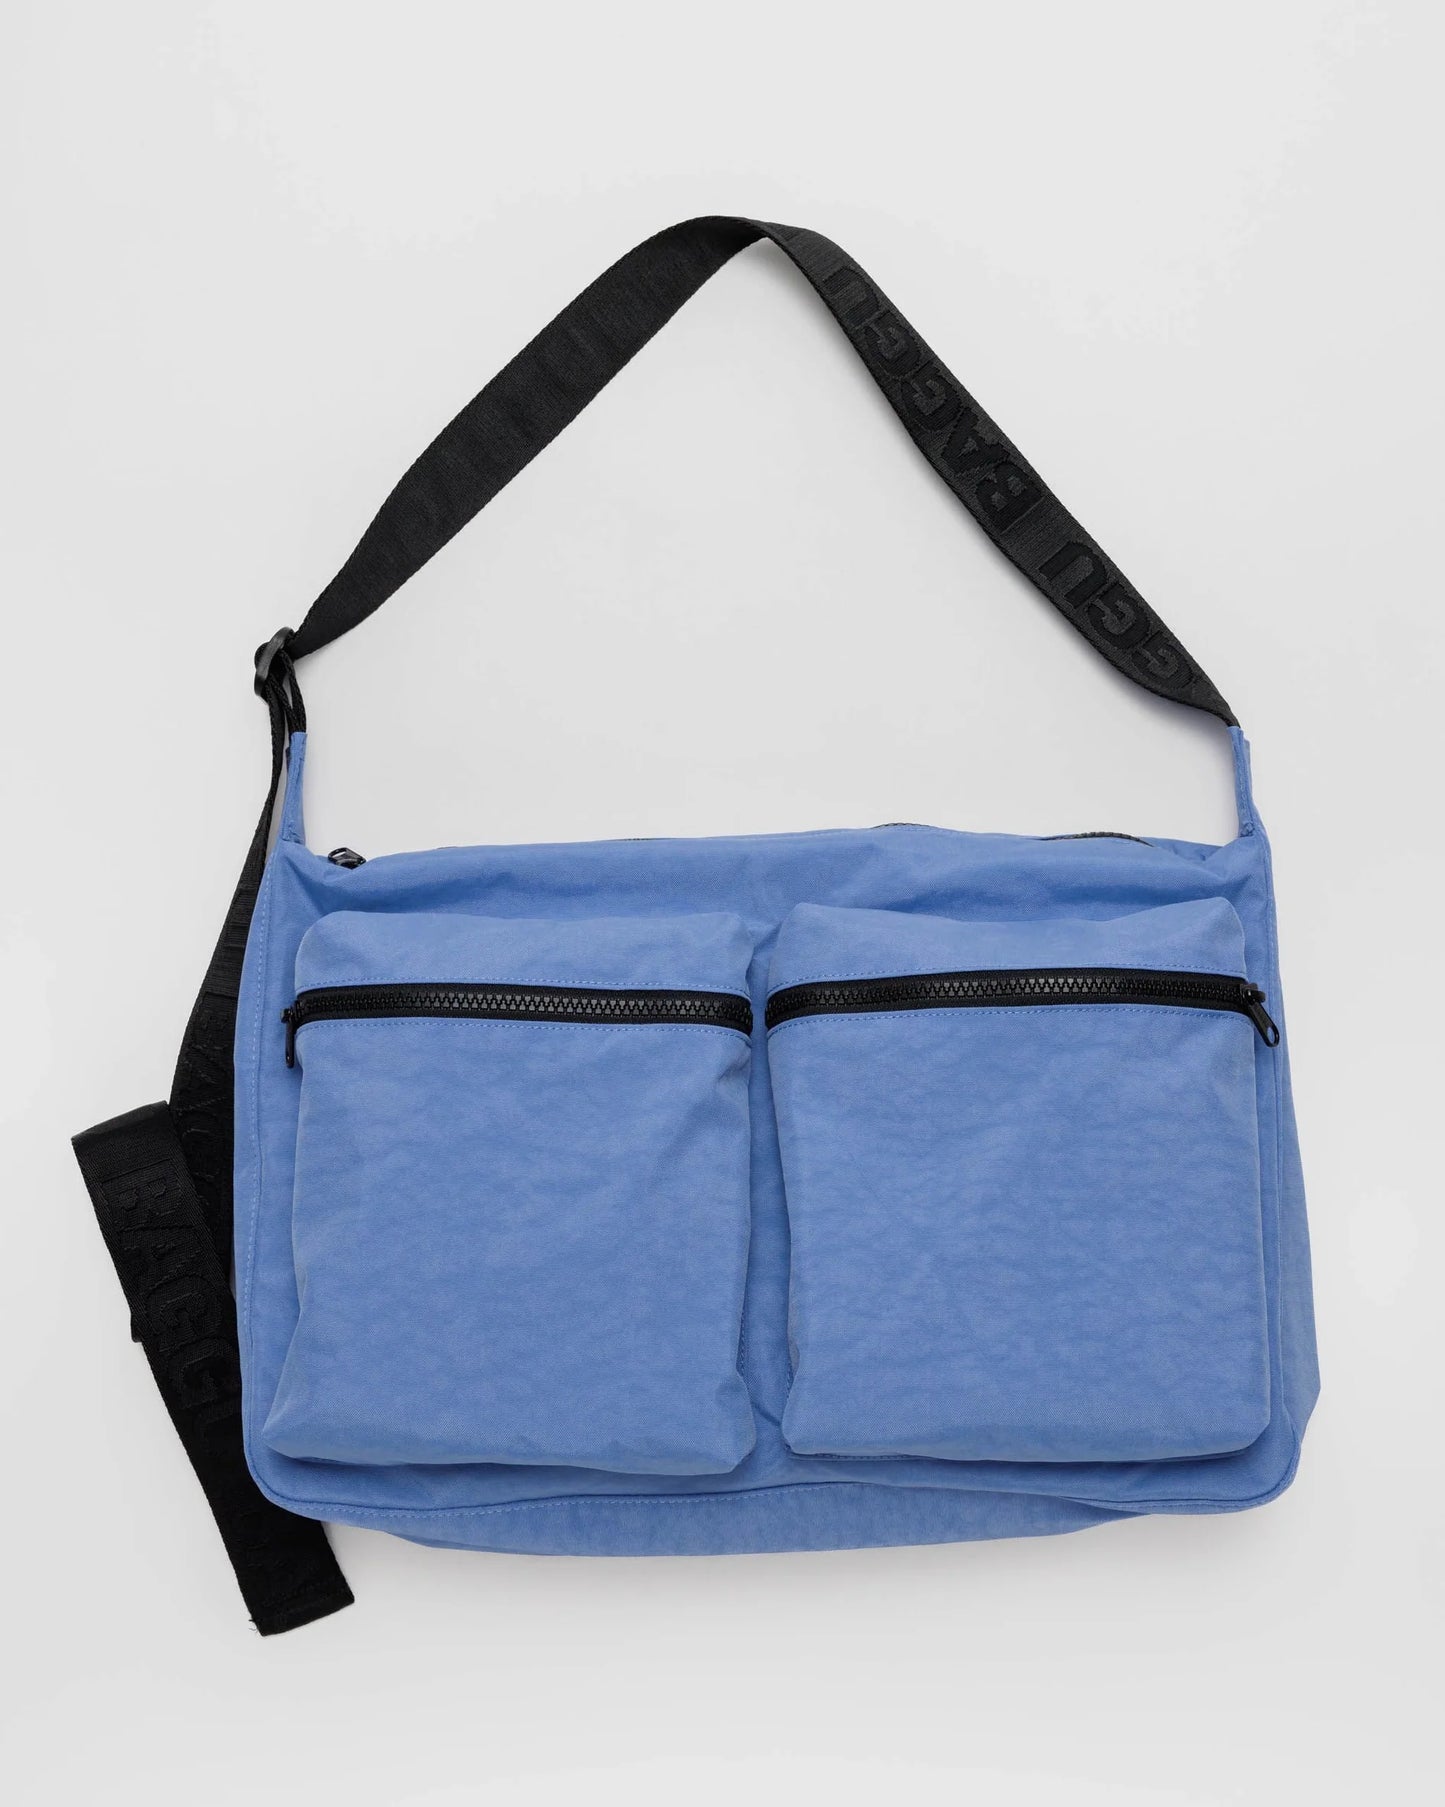 BAGGU large cargo crossbody bag in pansy blue colour